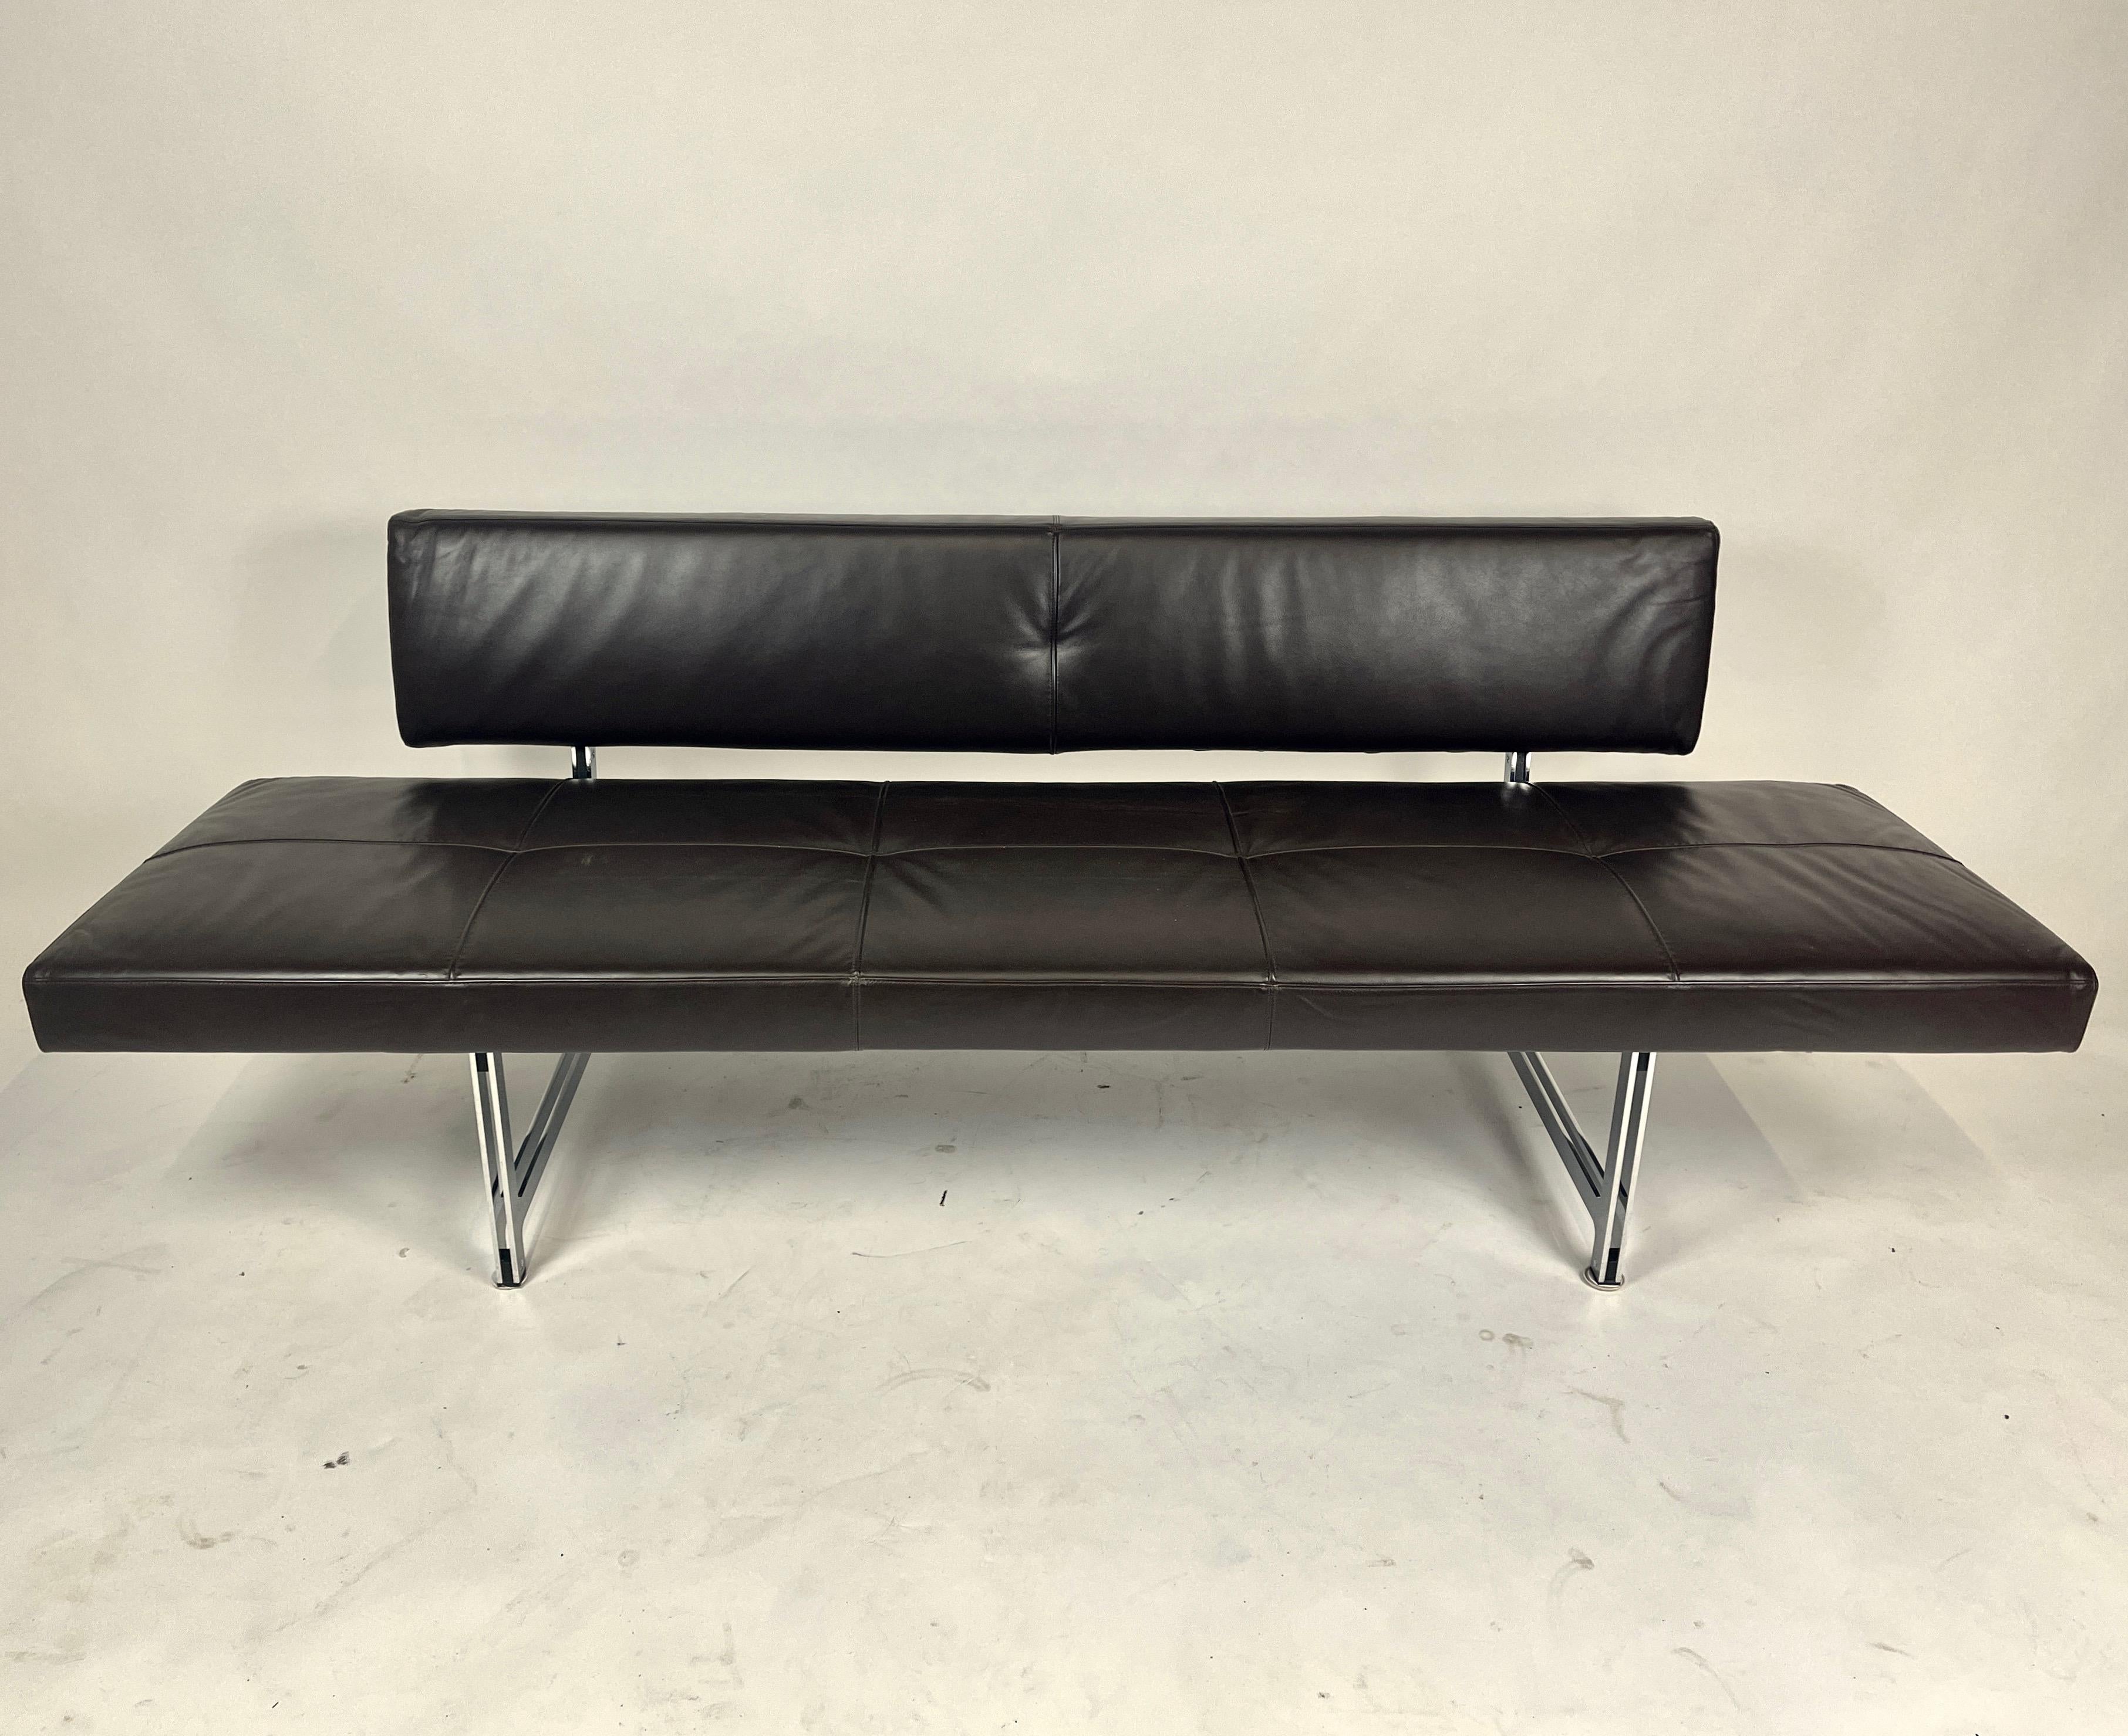 American Sleek Norman Foster for Walter Knoll Leather Sofa / Daybed 'Foster 510'